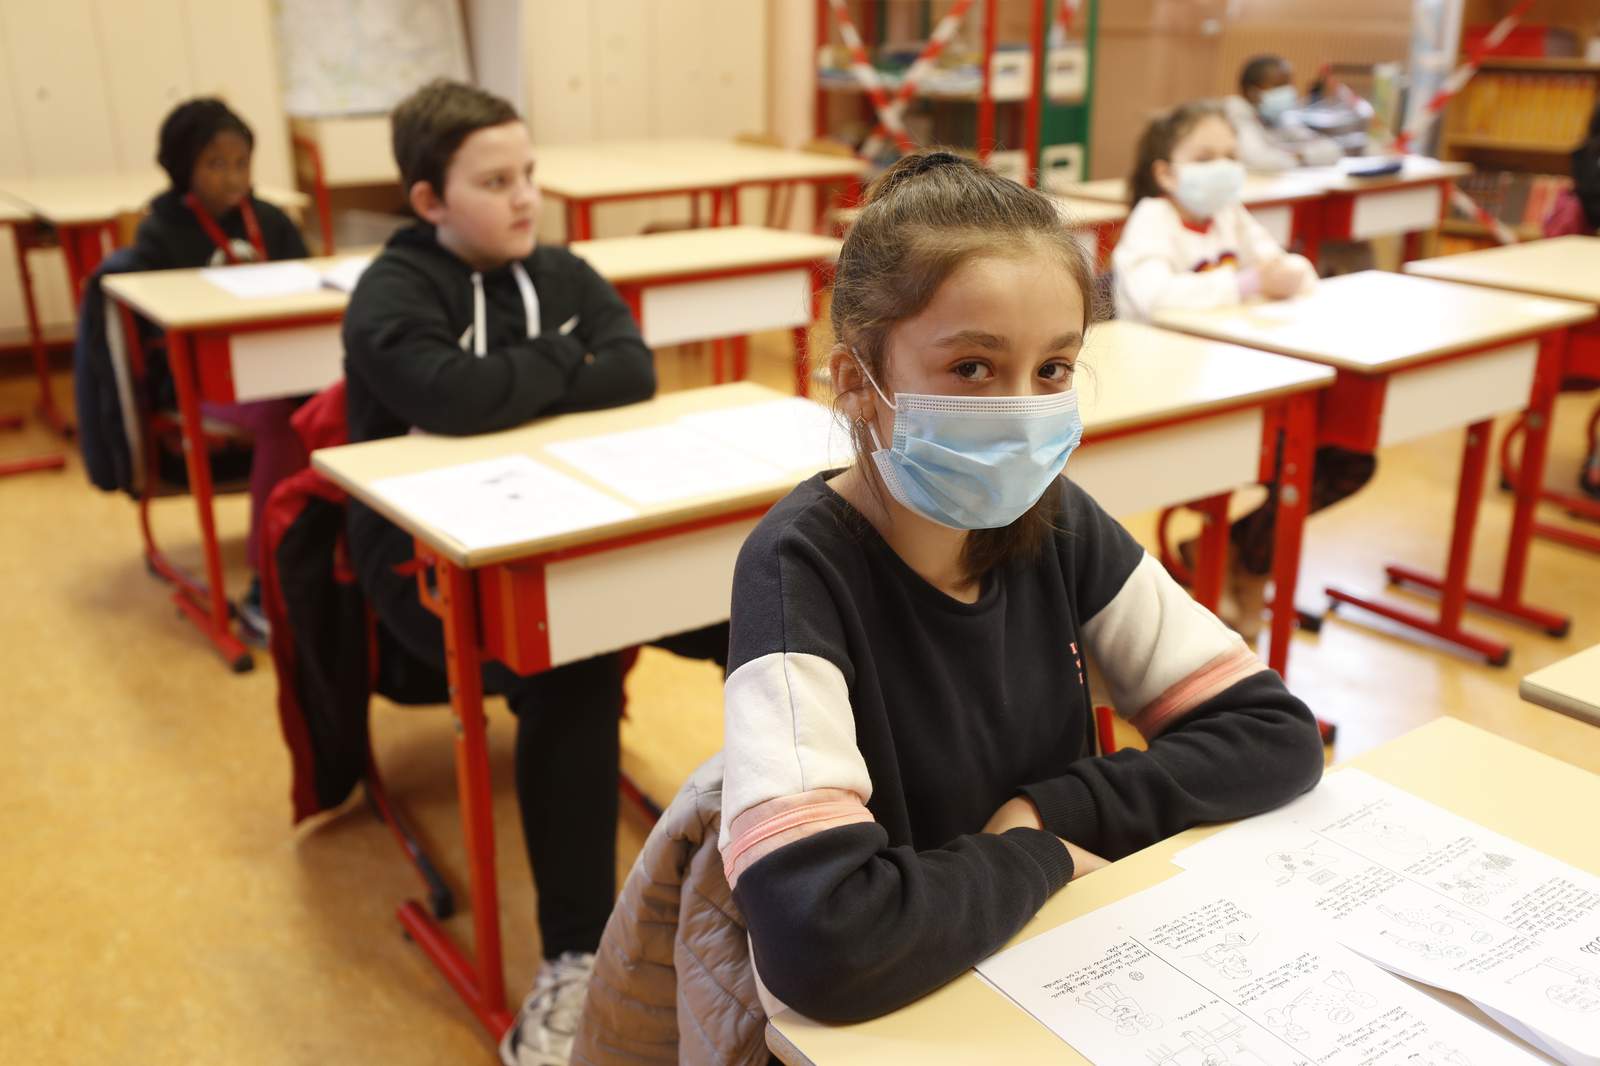 Ask 2: Will my child have to wear a mask when they go back to school in the fall?